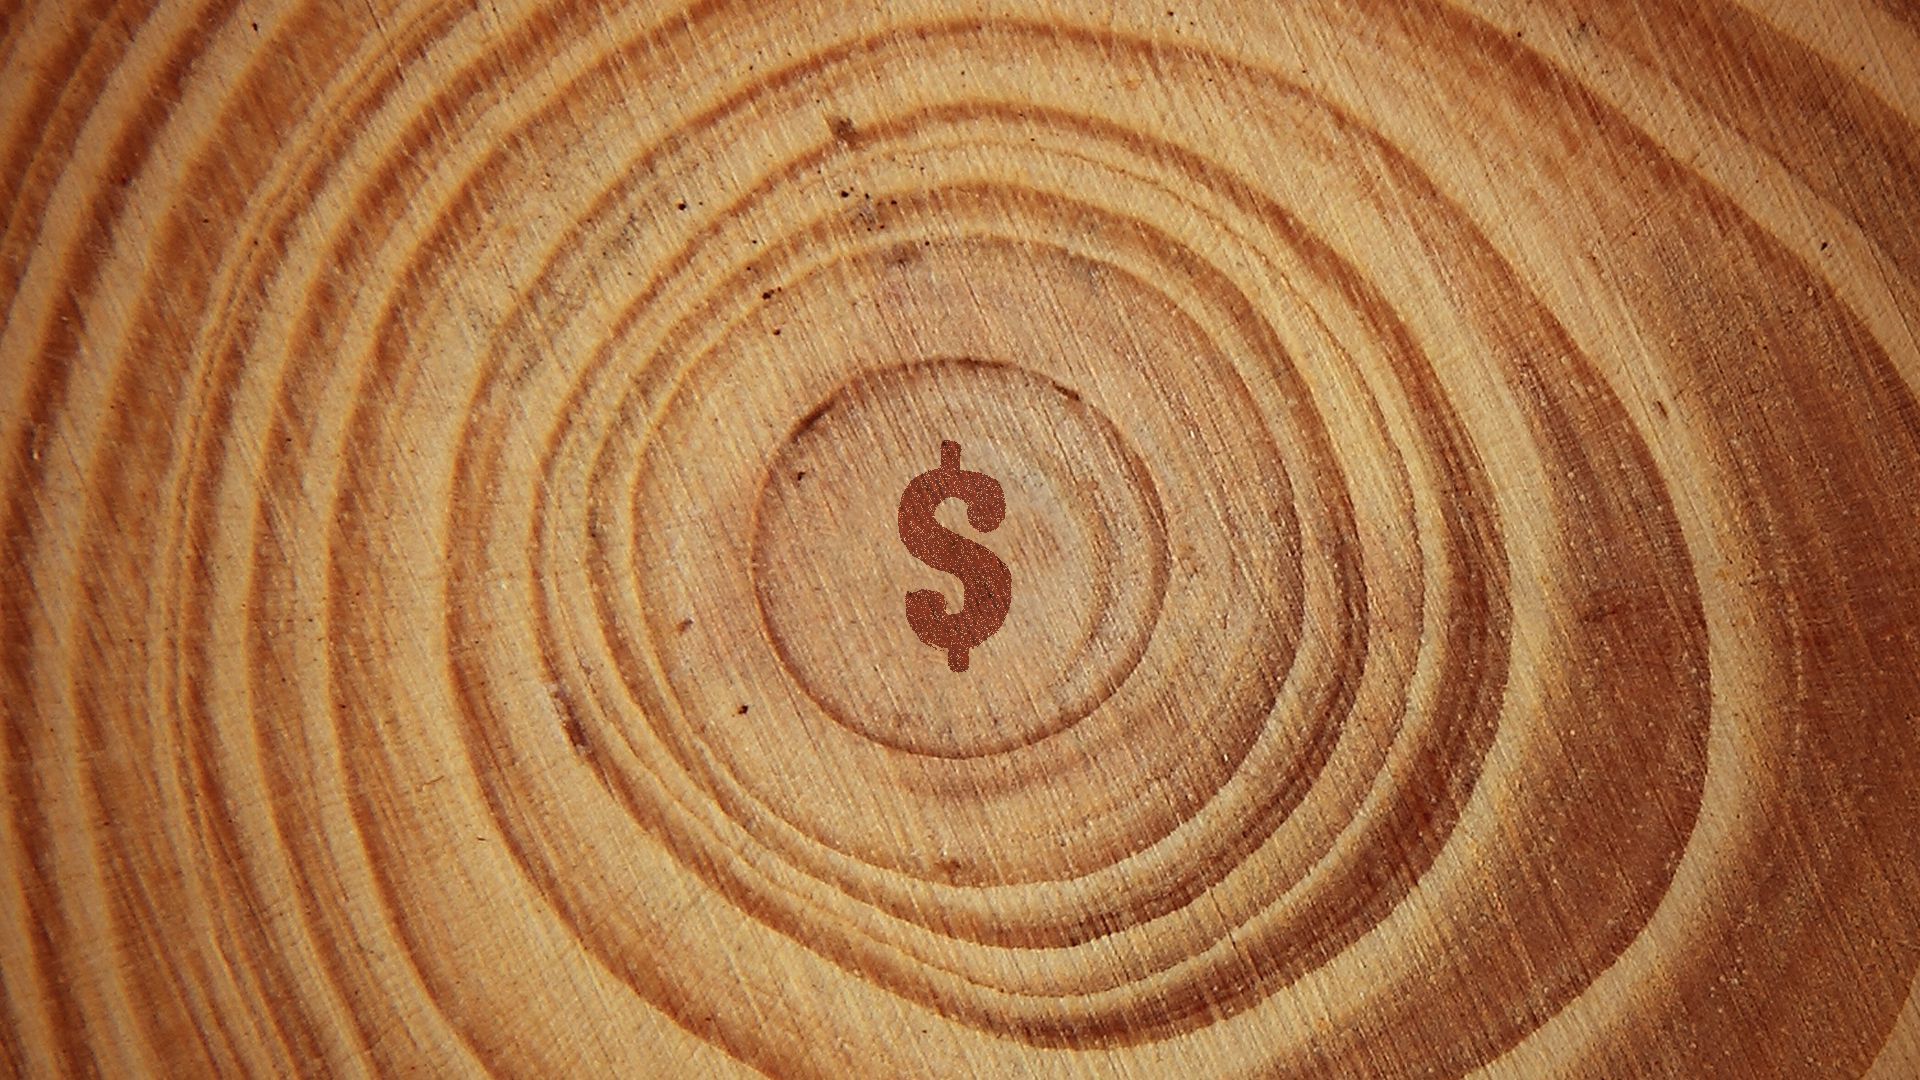 Illustration of a pattern of tree rings with the center ring as a dollar bill sign. 